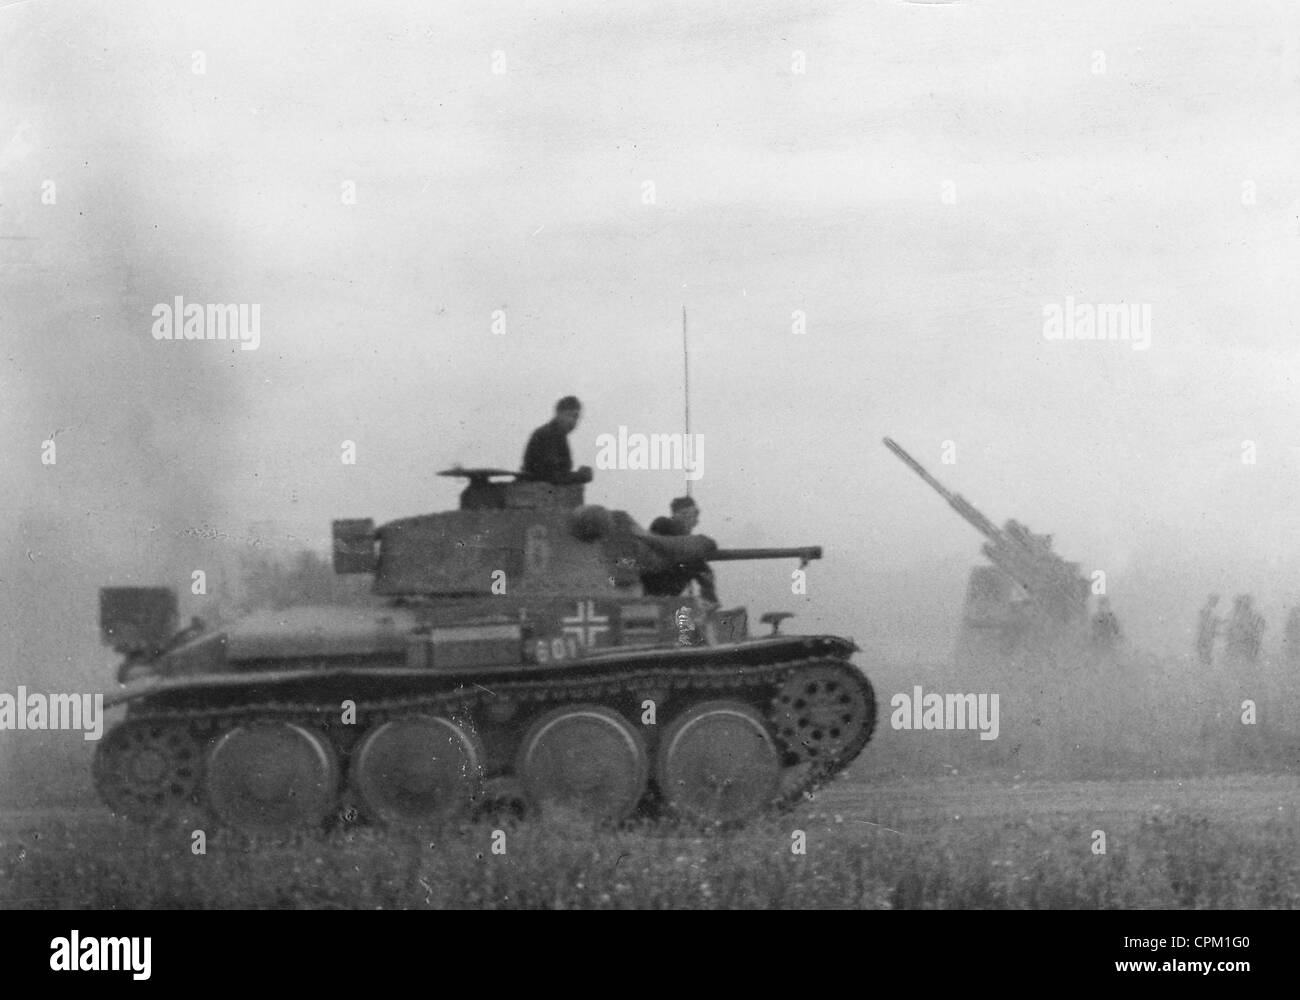 German Panzer 38 (t), on the Eastern Front, 1941 Stock Photo